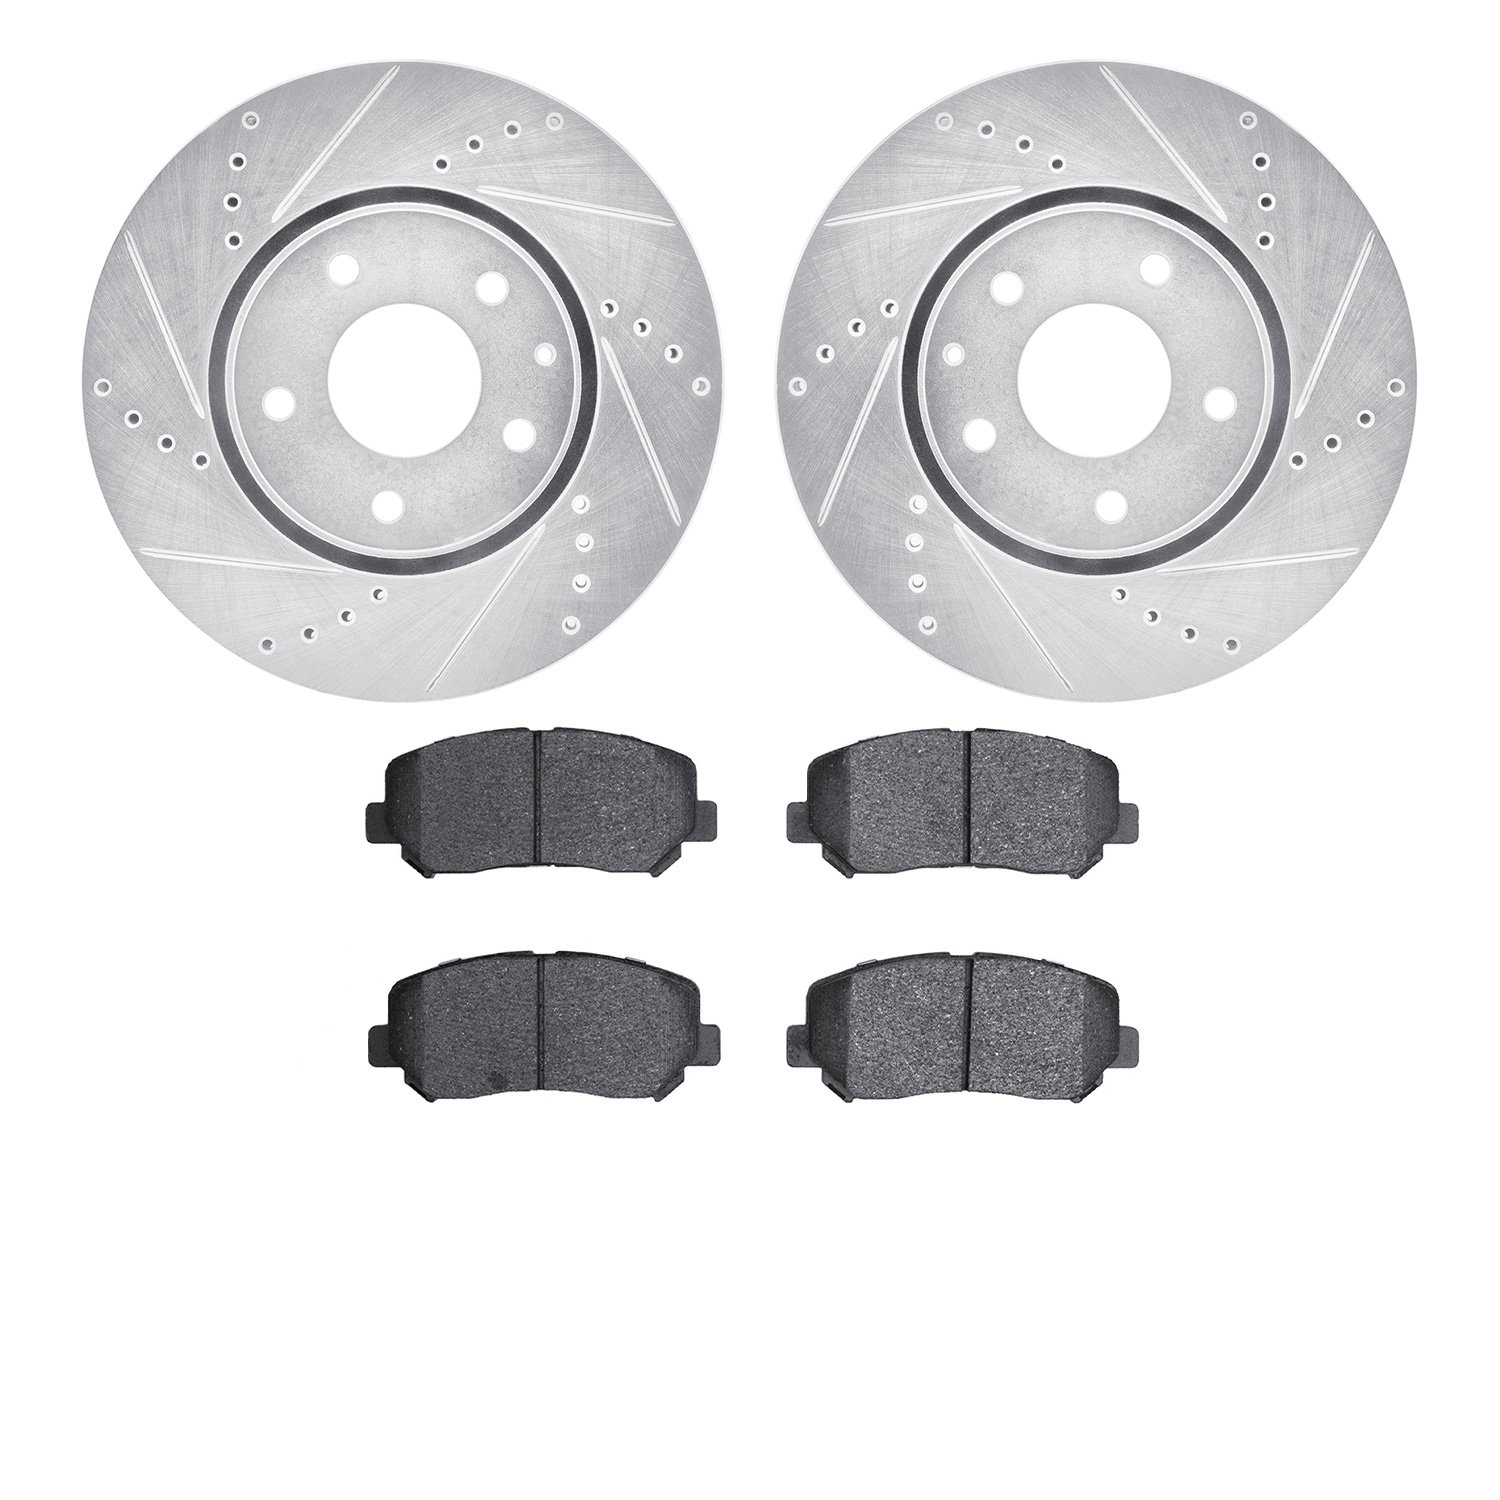 7502-80074 Drilled/Slotted Brake Rotors w/5000 Advanced Brake Pads Kit [Silver], Fits Select Ford/Lincoln/Mercury/Mazda, Positio